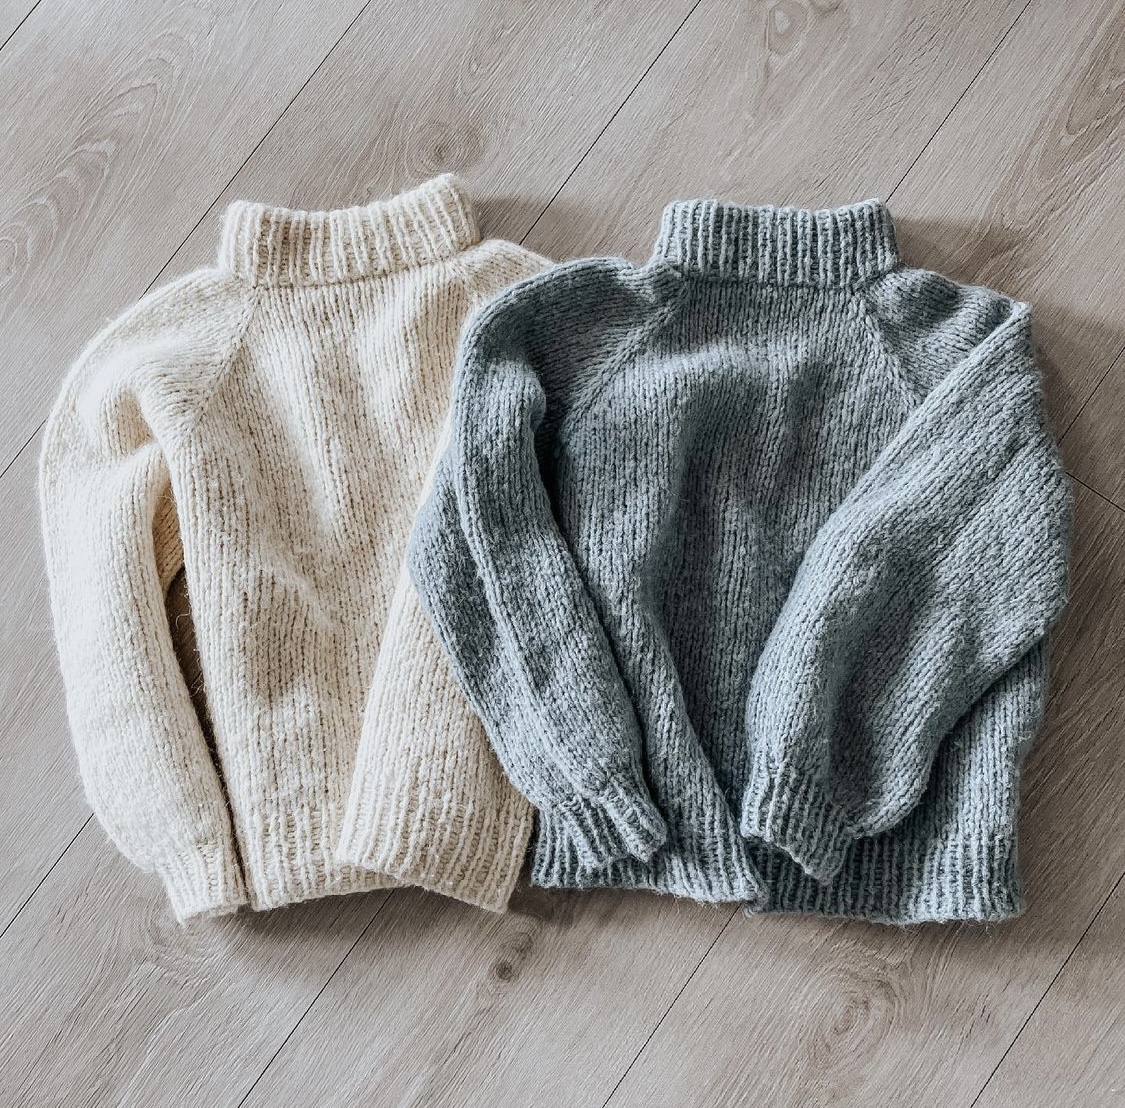 Top 5 sweaters you can knit yourself! - Knitandnote